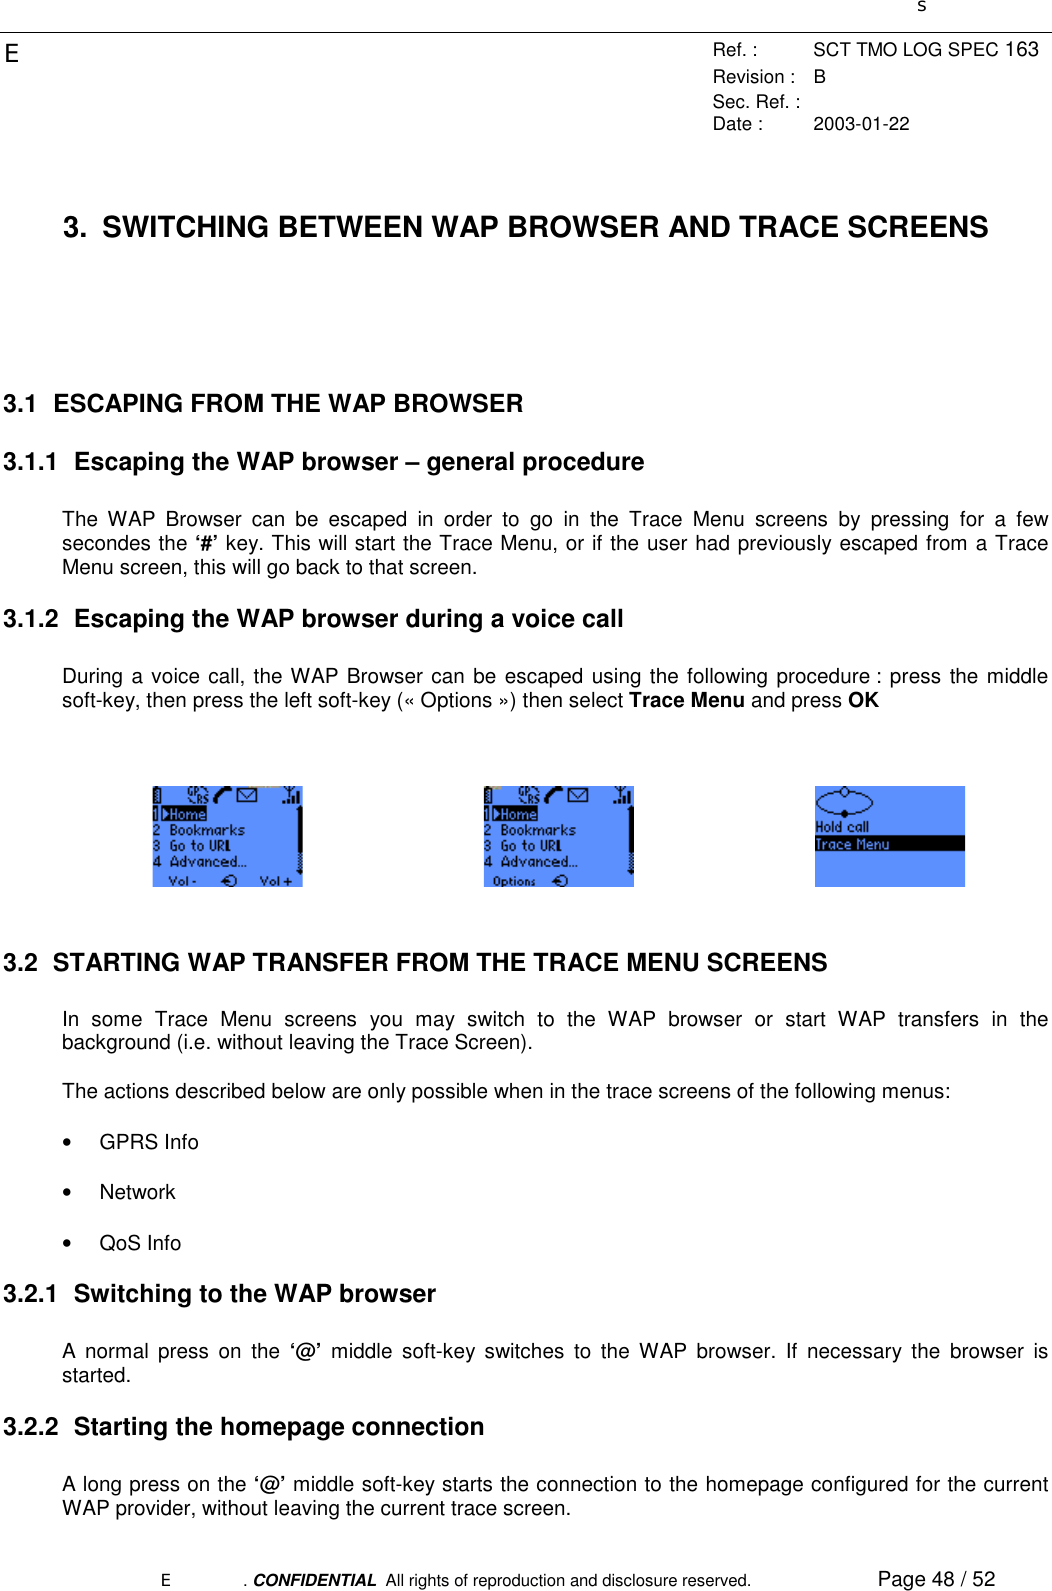 sERef. : SCT TMO LOG SPEC 163Revision : BSec. Ref. :Date : 2003-01-22E. CONFIDENTIAL  All rights of reproduction and disclosure reserved. Page 48 / 523.  SWITCHING BETWEEN WAP BROWSER AND TRACE SCREENS3.1  ESCAPING FROM THE WAP BROWSER3.1.1  Escaping the WAP browser – general procedureThe WAP Browser can be escaped in order to go in the Trace Menu screens by pressing for a fewsecondes the ‘#’ key. This will start the Trace Menu, or if the user had previously escaped from a TraceMenu screen, this will go back to that screen.3.1.2  Escaping the WAP browser during a voice callDuring a voice call, the WAP Browser can be escaped using the following procedure : press the middlesoft-key, then press the left soft-key (« Options ») then select Trace Menu and press OK3.2  STARTING WAP TRANSFER FROM THE TRACE MENU SCREENSIn some Trace Menu screens you may switch to the WAP browser or start WAP transfers in thebackground (i.e. without leaving the Trace Screen).The actions described below are only possible when in the trace screens of the following menus:• GPRS Info• Network• QoS Info3.2.1  Switching to the WAP browserA normal press on the ‘@’  middle soft-key switches to the WAP browser. If necessary the browser isstarted.3.2.2  Starting the homepage connectionA long press on the ‘@’ middle soft-key starts the connection to the homepage configured for the currentWAP provider, without leaving the current trace screen.